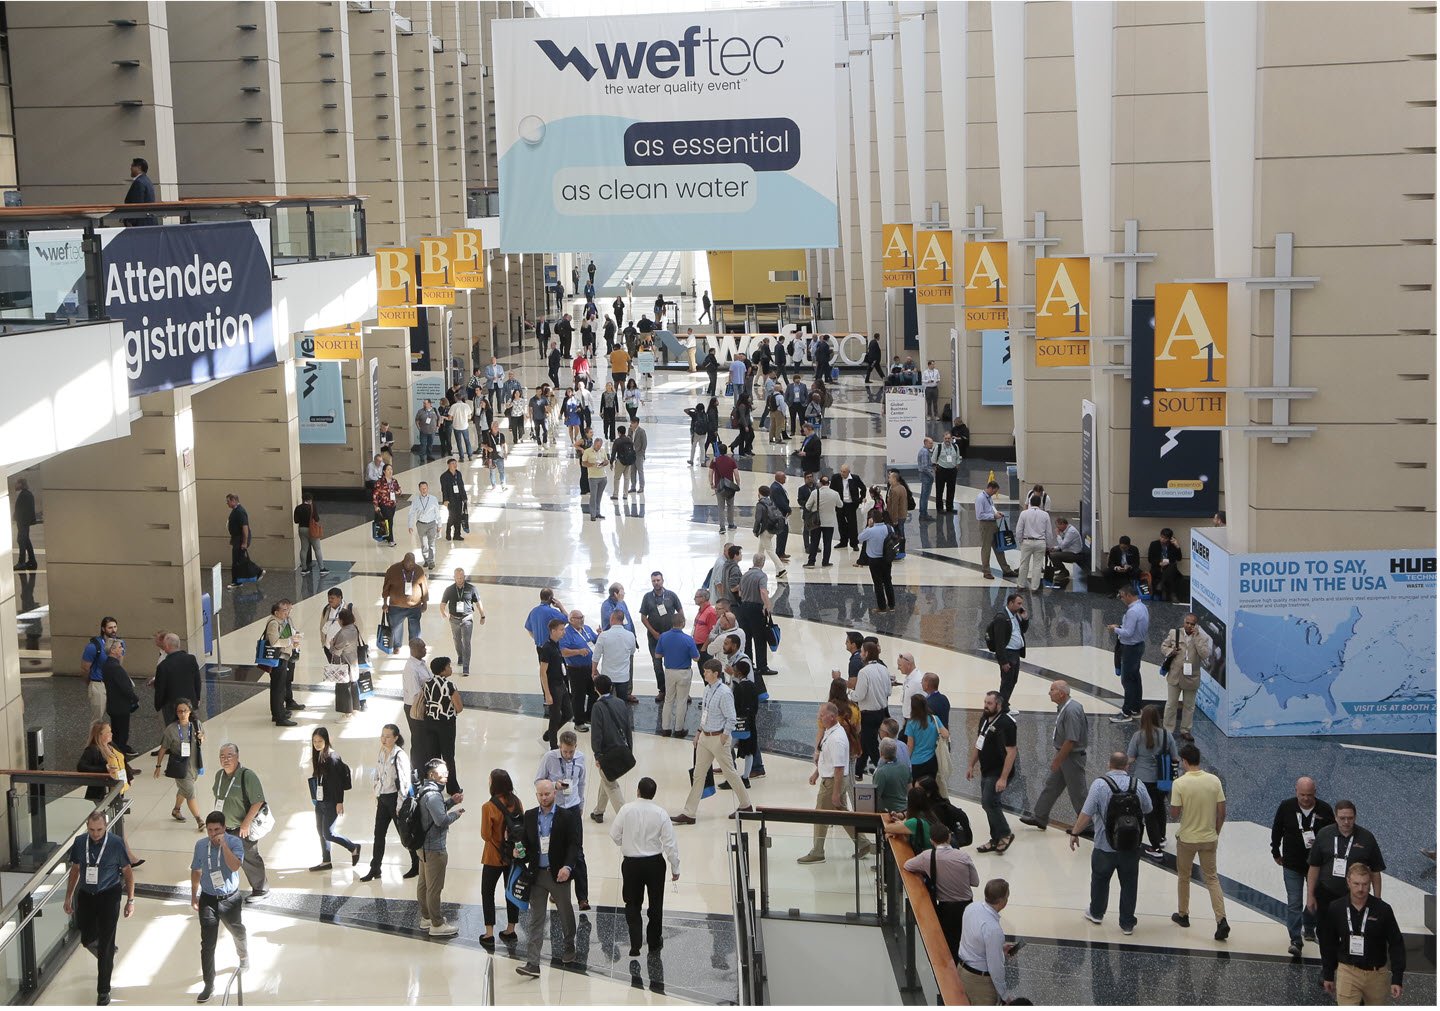 About WEFTEC